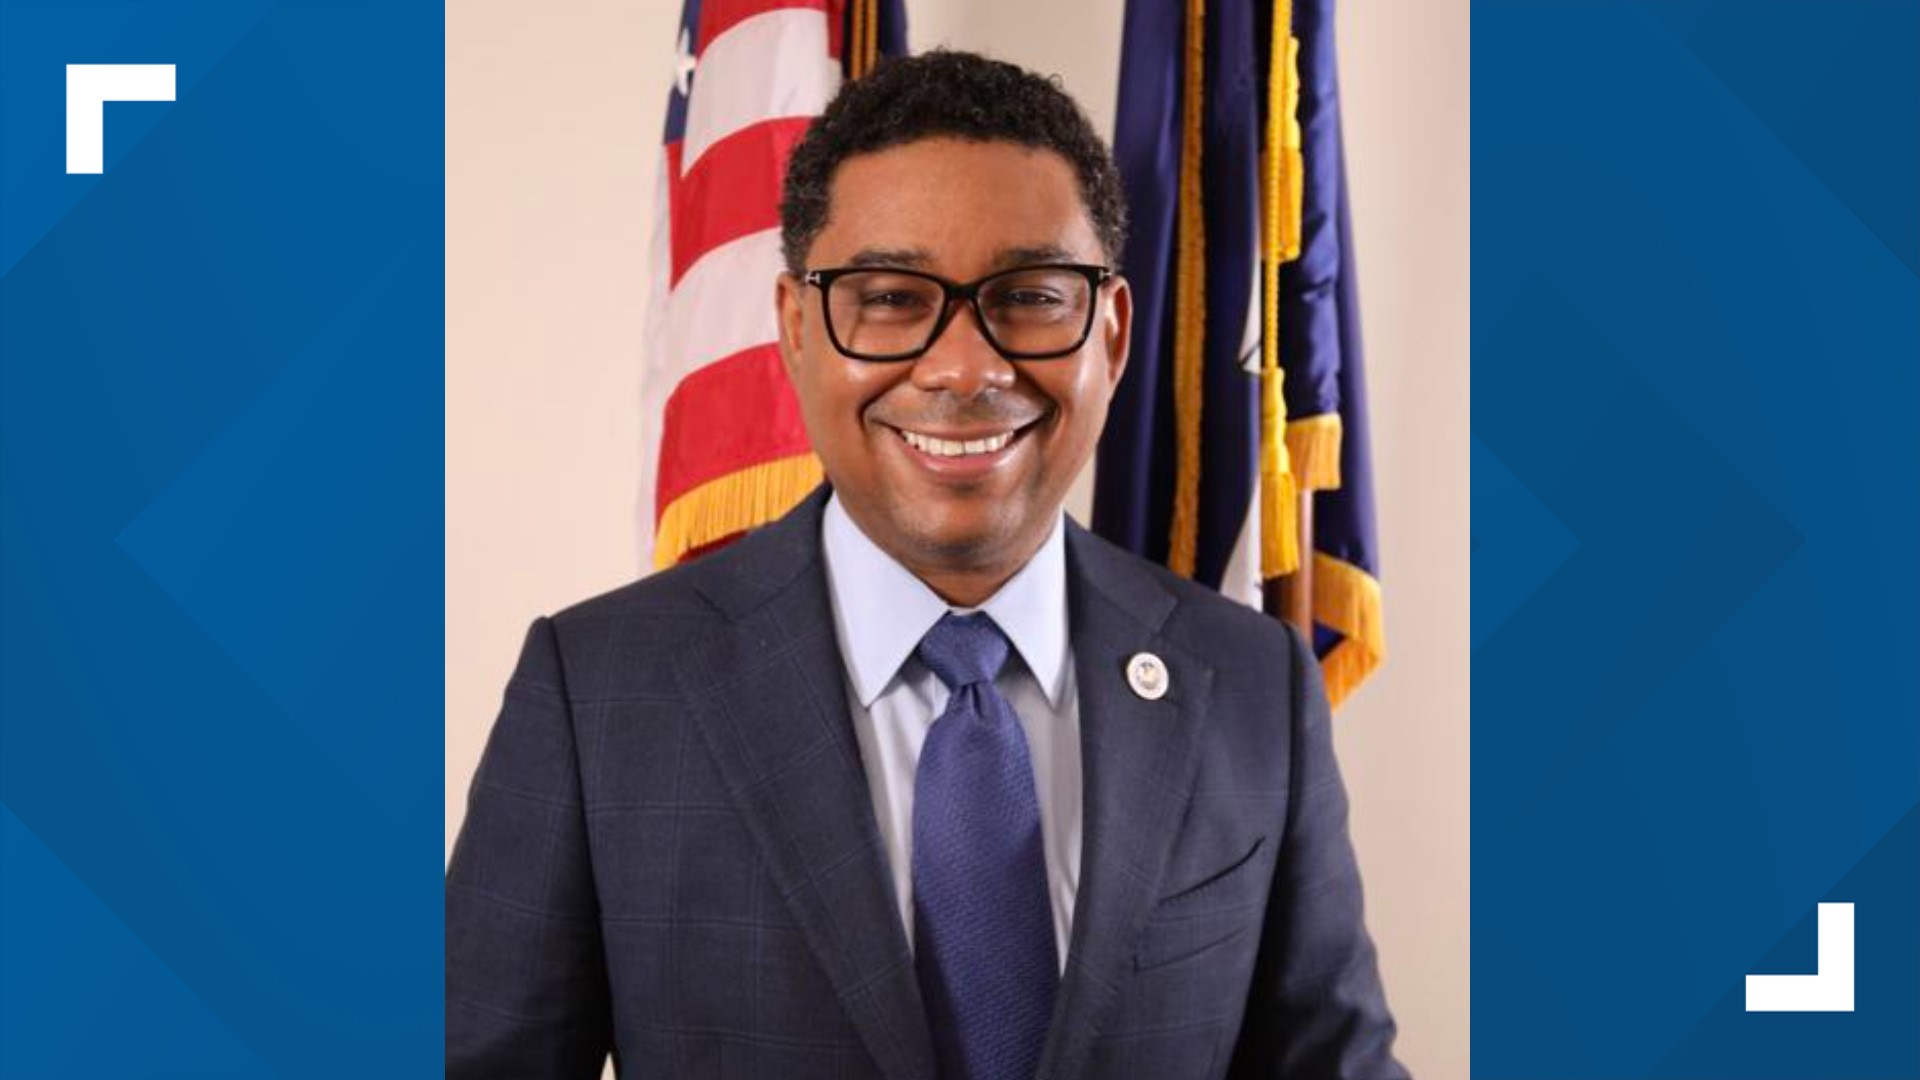 Gary Carter Jr., the nephew of Congressman Troy Carter, has been elected to fill the seat of the District 7 senate seat.